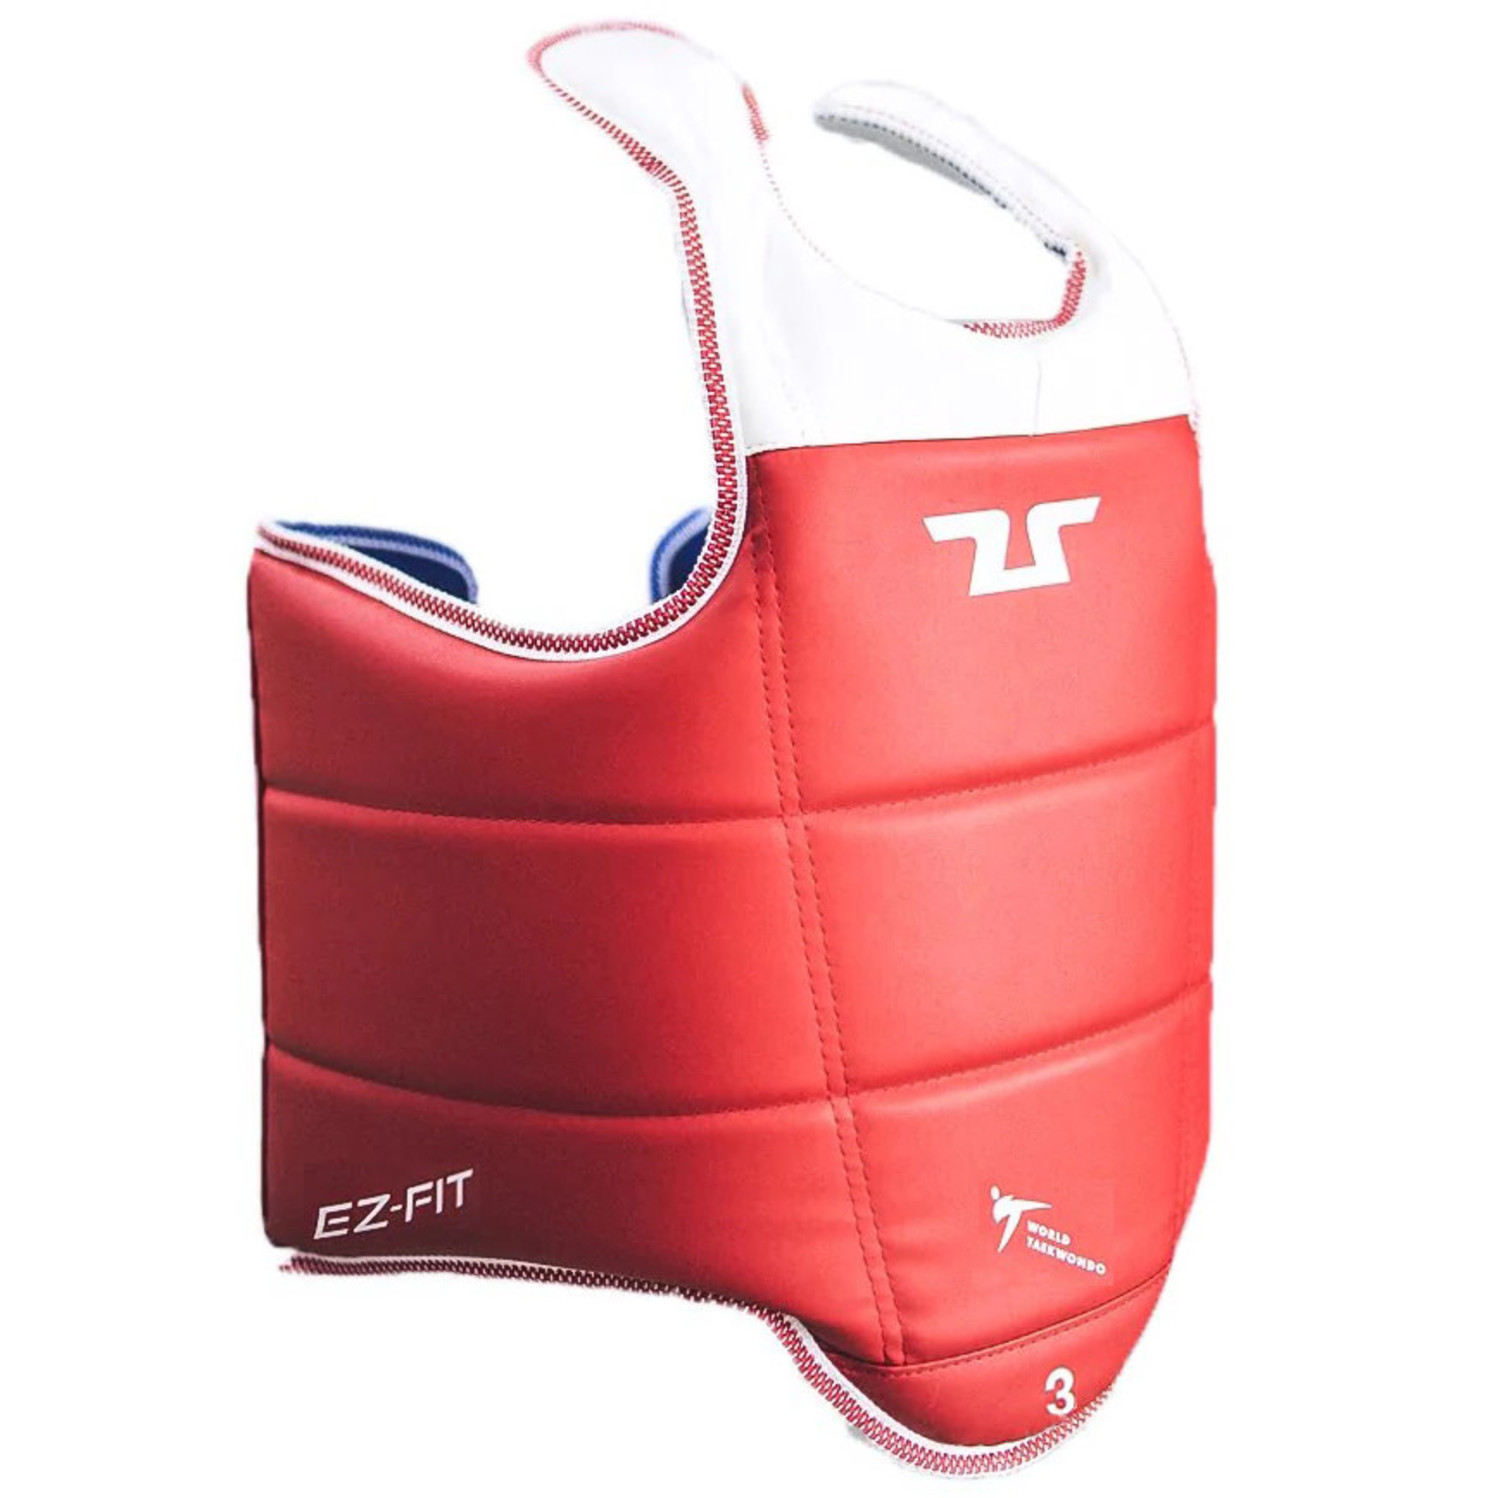 New! Tusah TKD Women's WTF Groin Cup Competition Sparring Gear Set